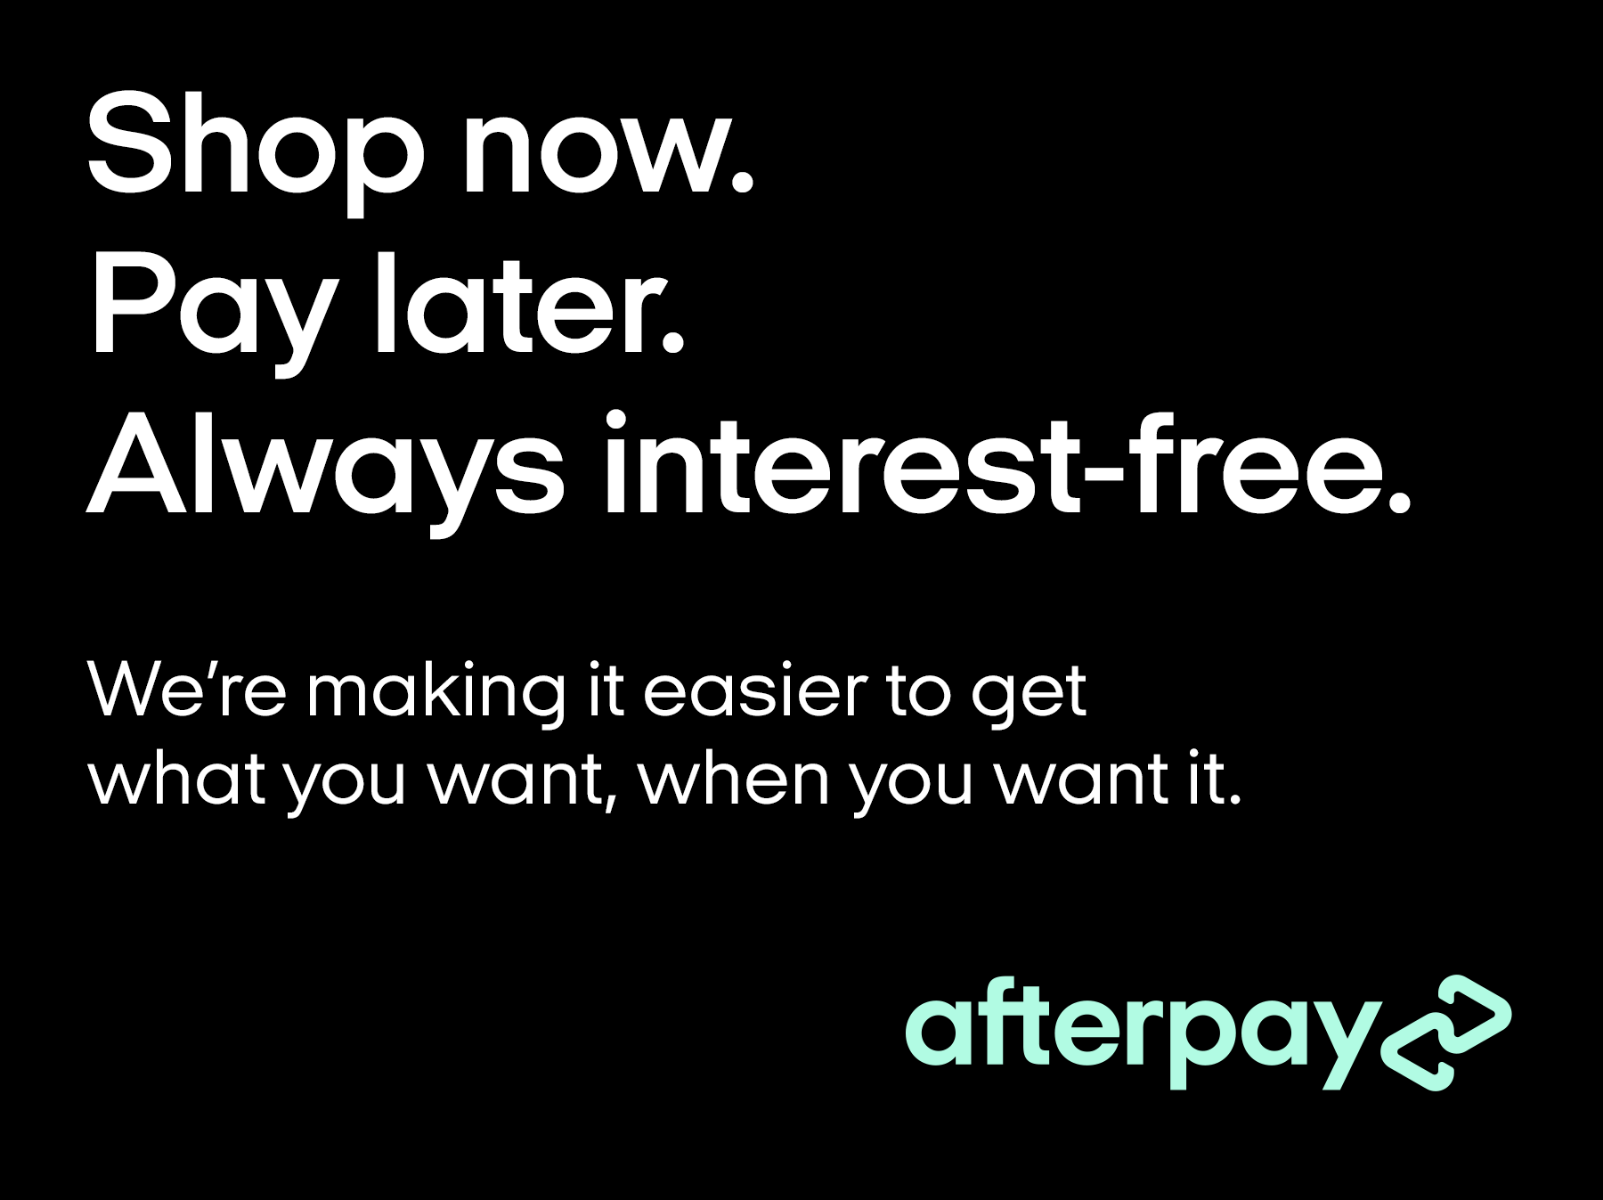 Afterpay Workwear at WorkScene - Buy 